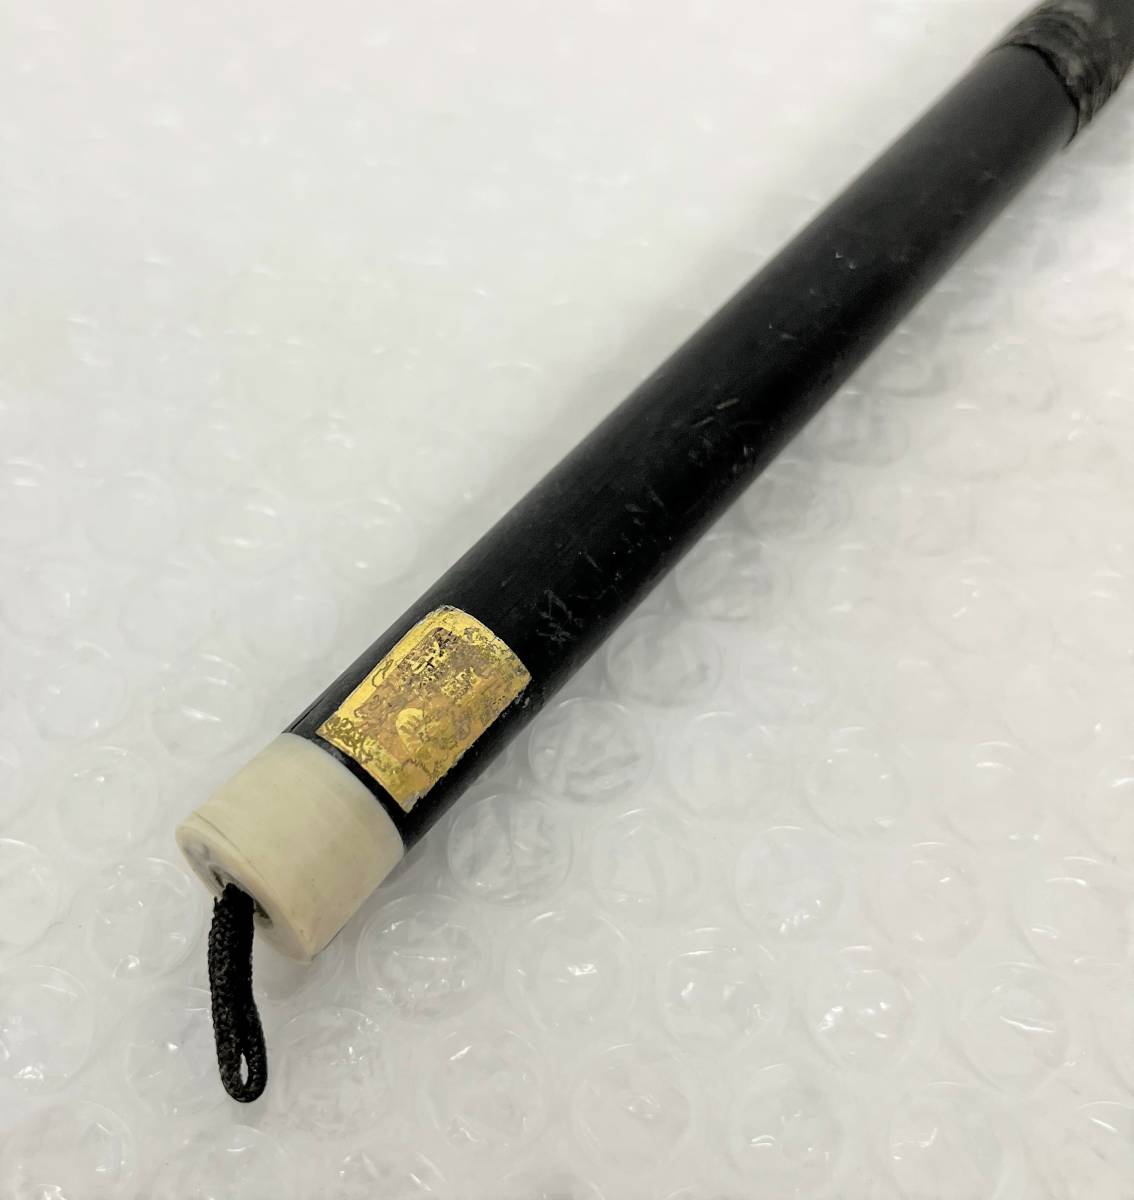  tradition industrial arts industrial arts fine art * original . writing brush .. length .. work writing brush wool writing brush * total length 290mm.70mm * speciality calligraphy calligrapher art house paper . Japan JAPAN present condition delivery 